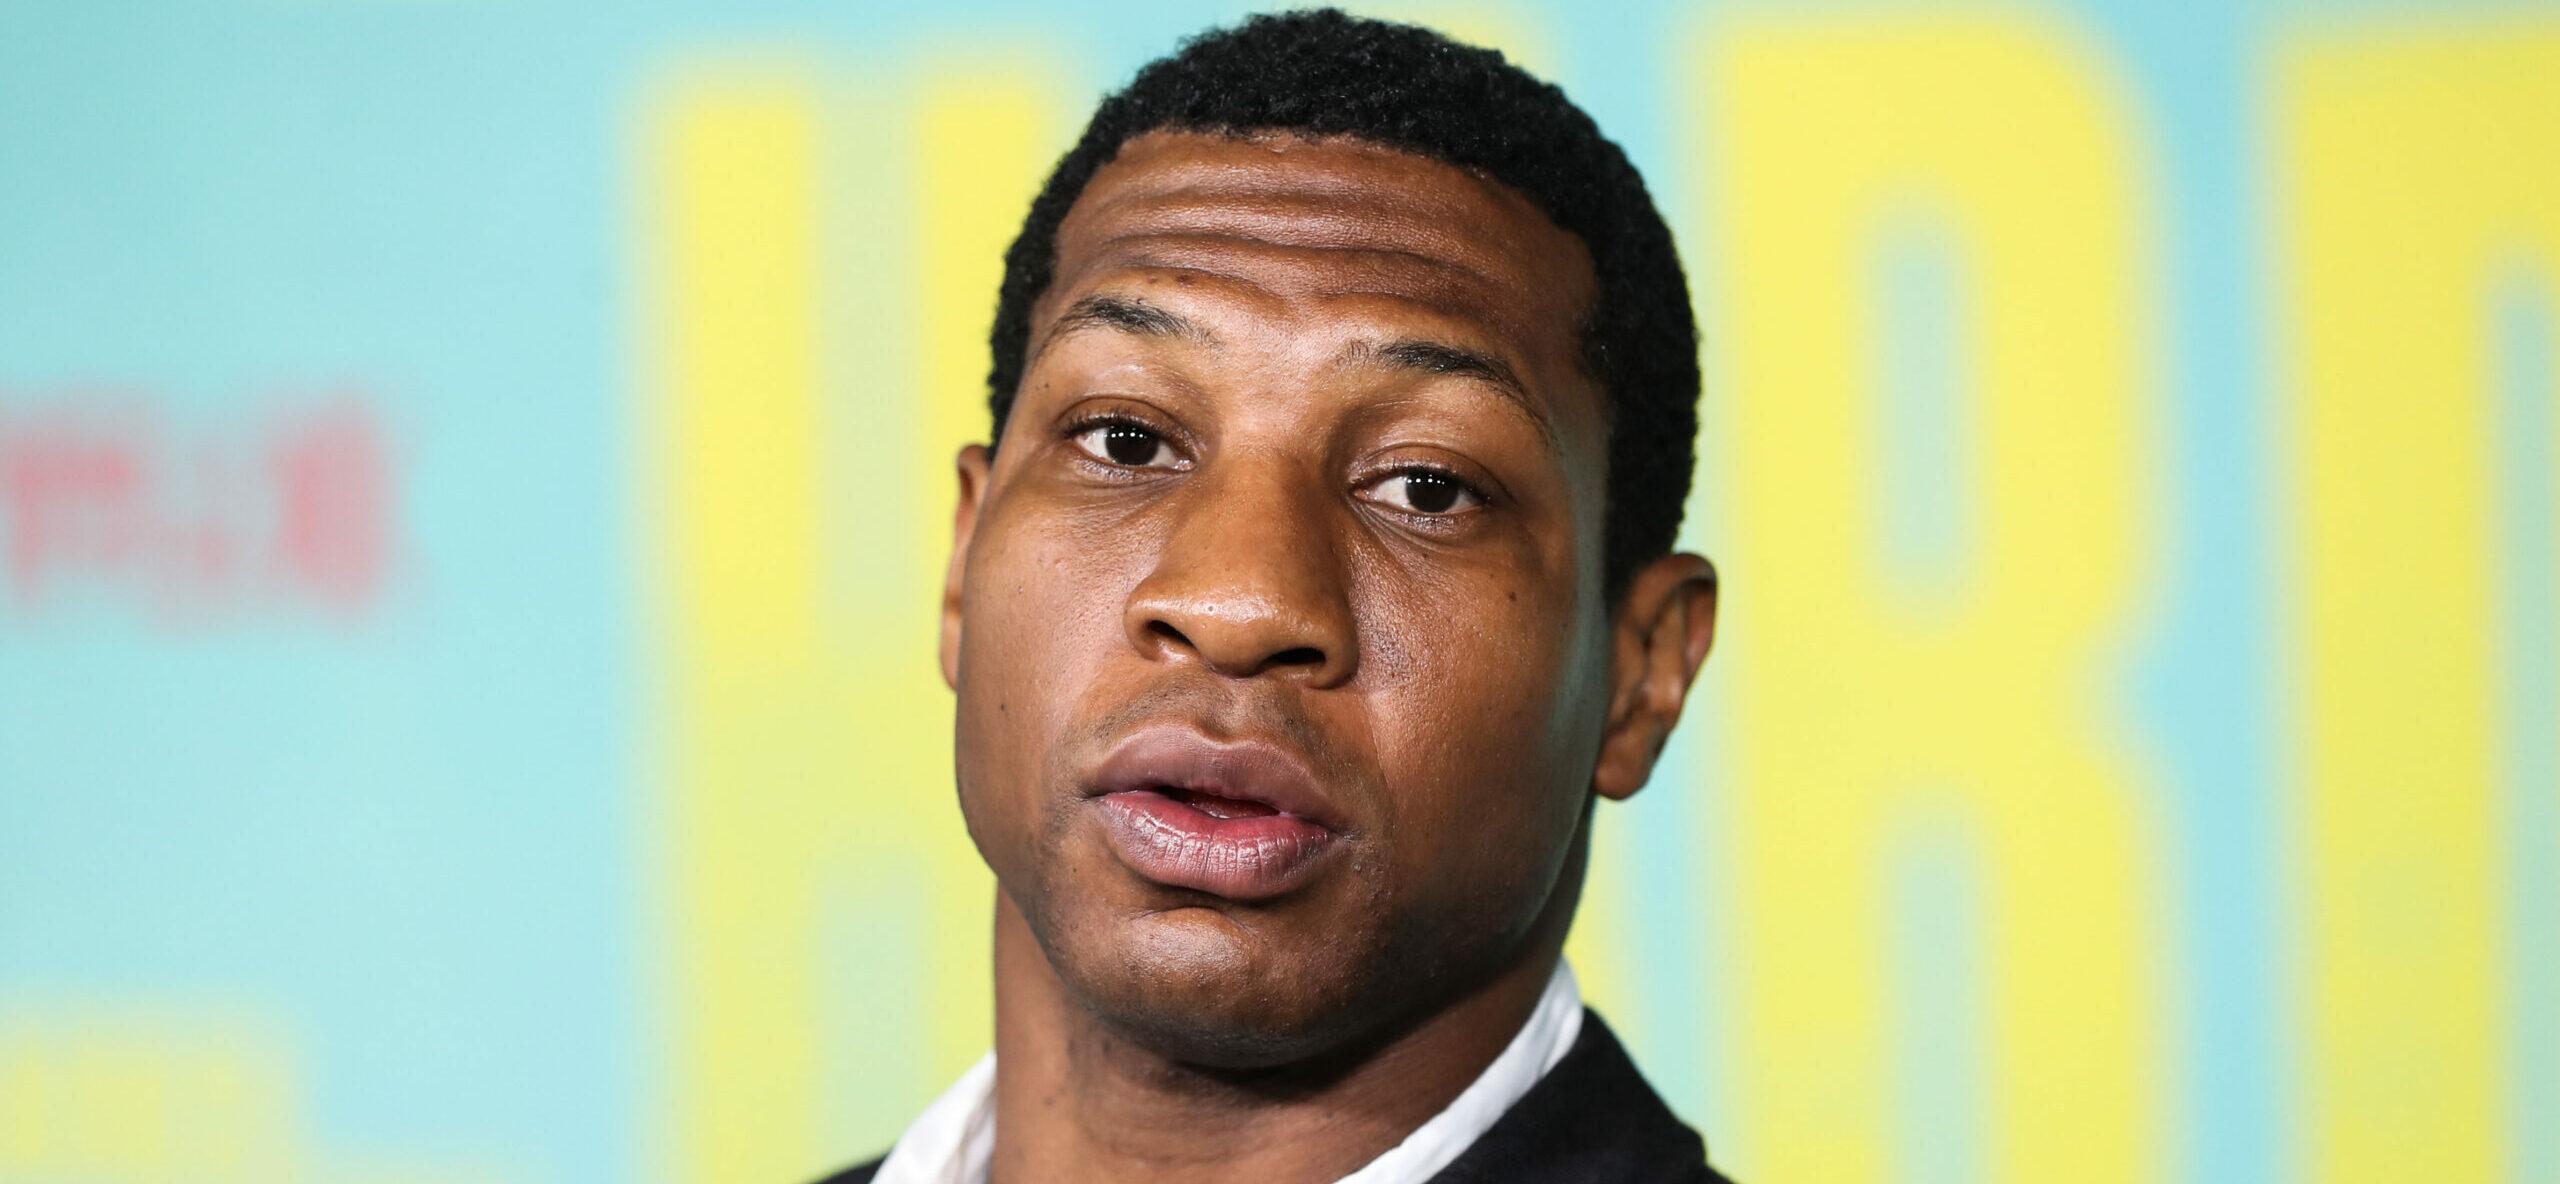 Jonathan Majors Trial Day 2: Judge Enforces Seal On Potentially ‘Inflammatory’ Evidence